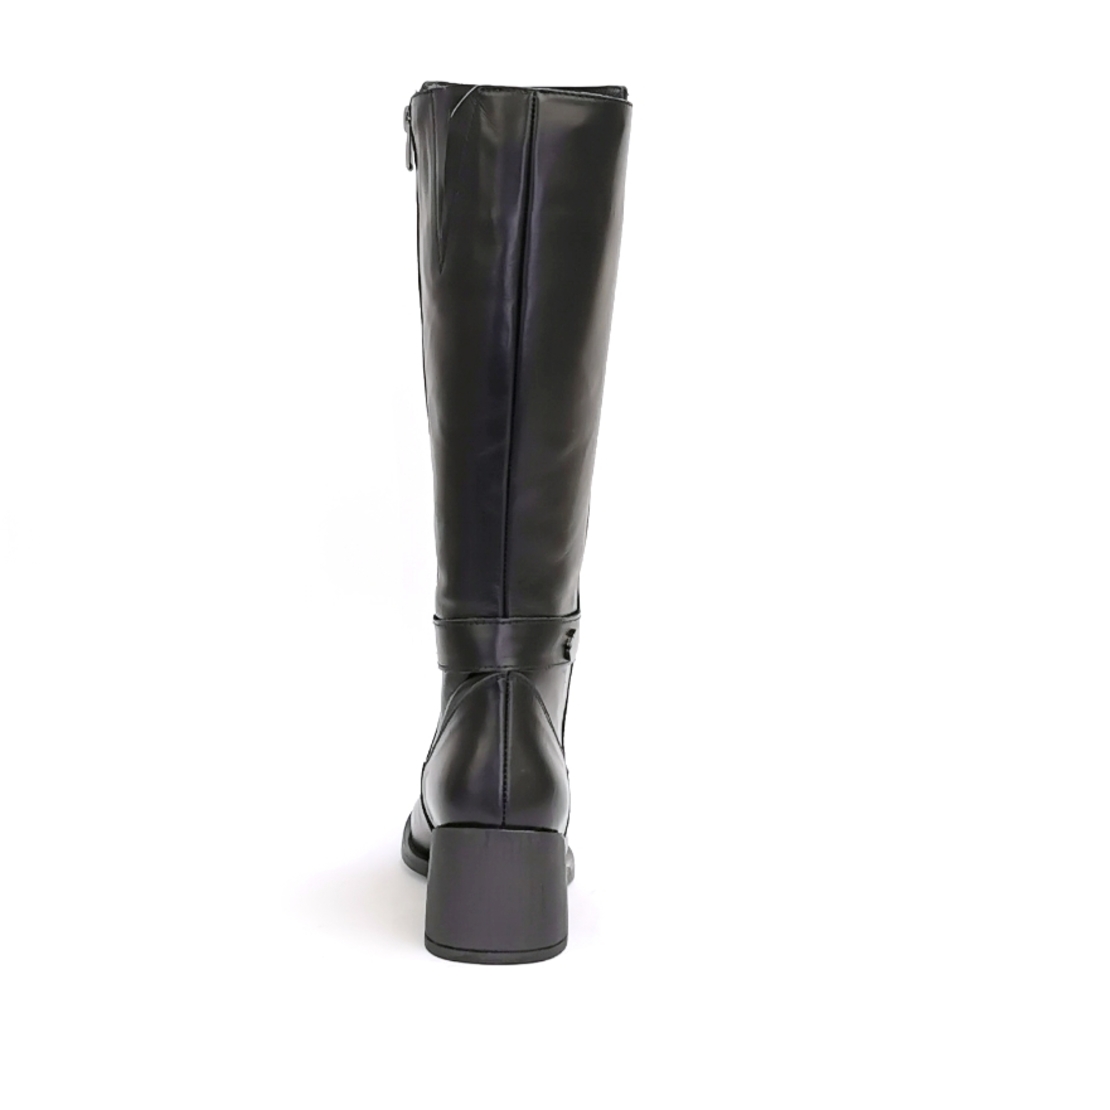 Women's elegant boots made of natural leather in black/7133